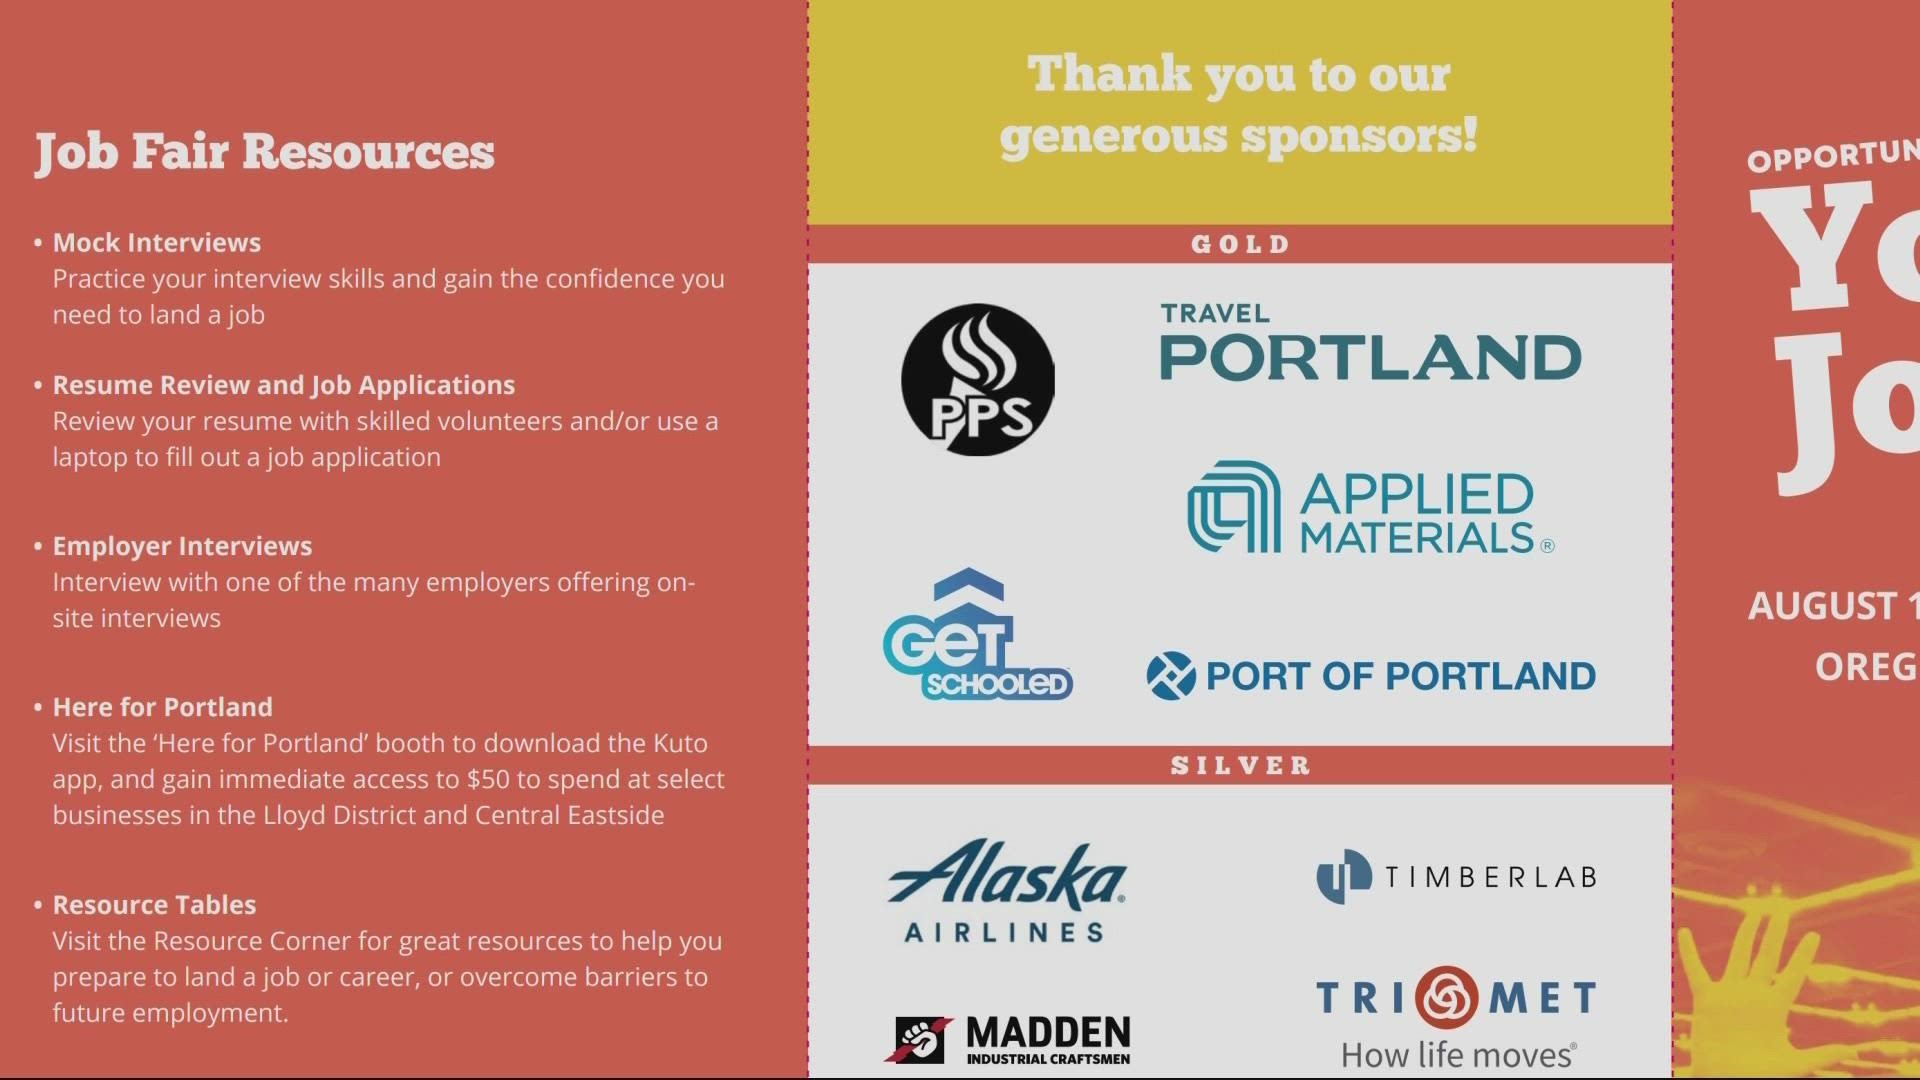 More than 60 employers will participate in the event. The pandemic exacerbated Portland’s struggles with high youth unemployment.